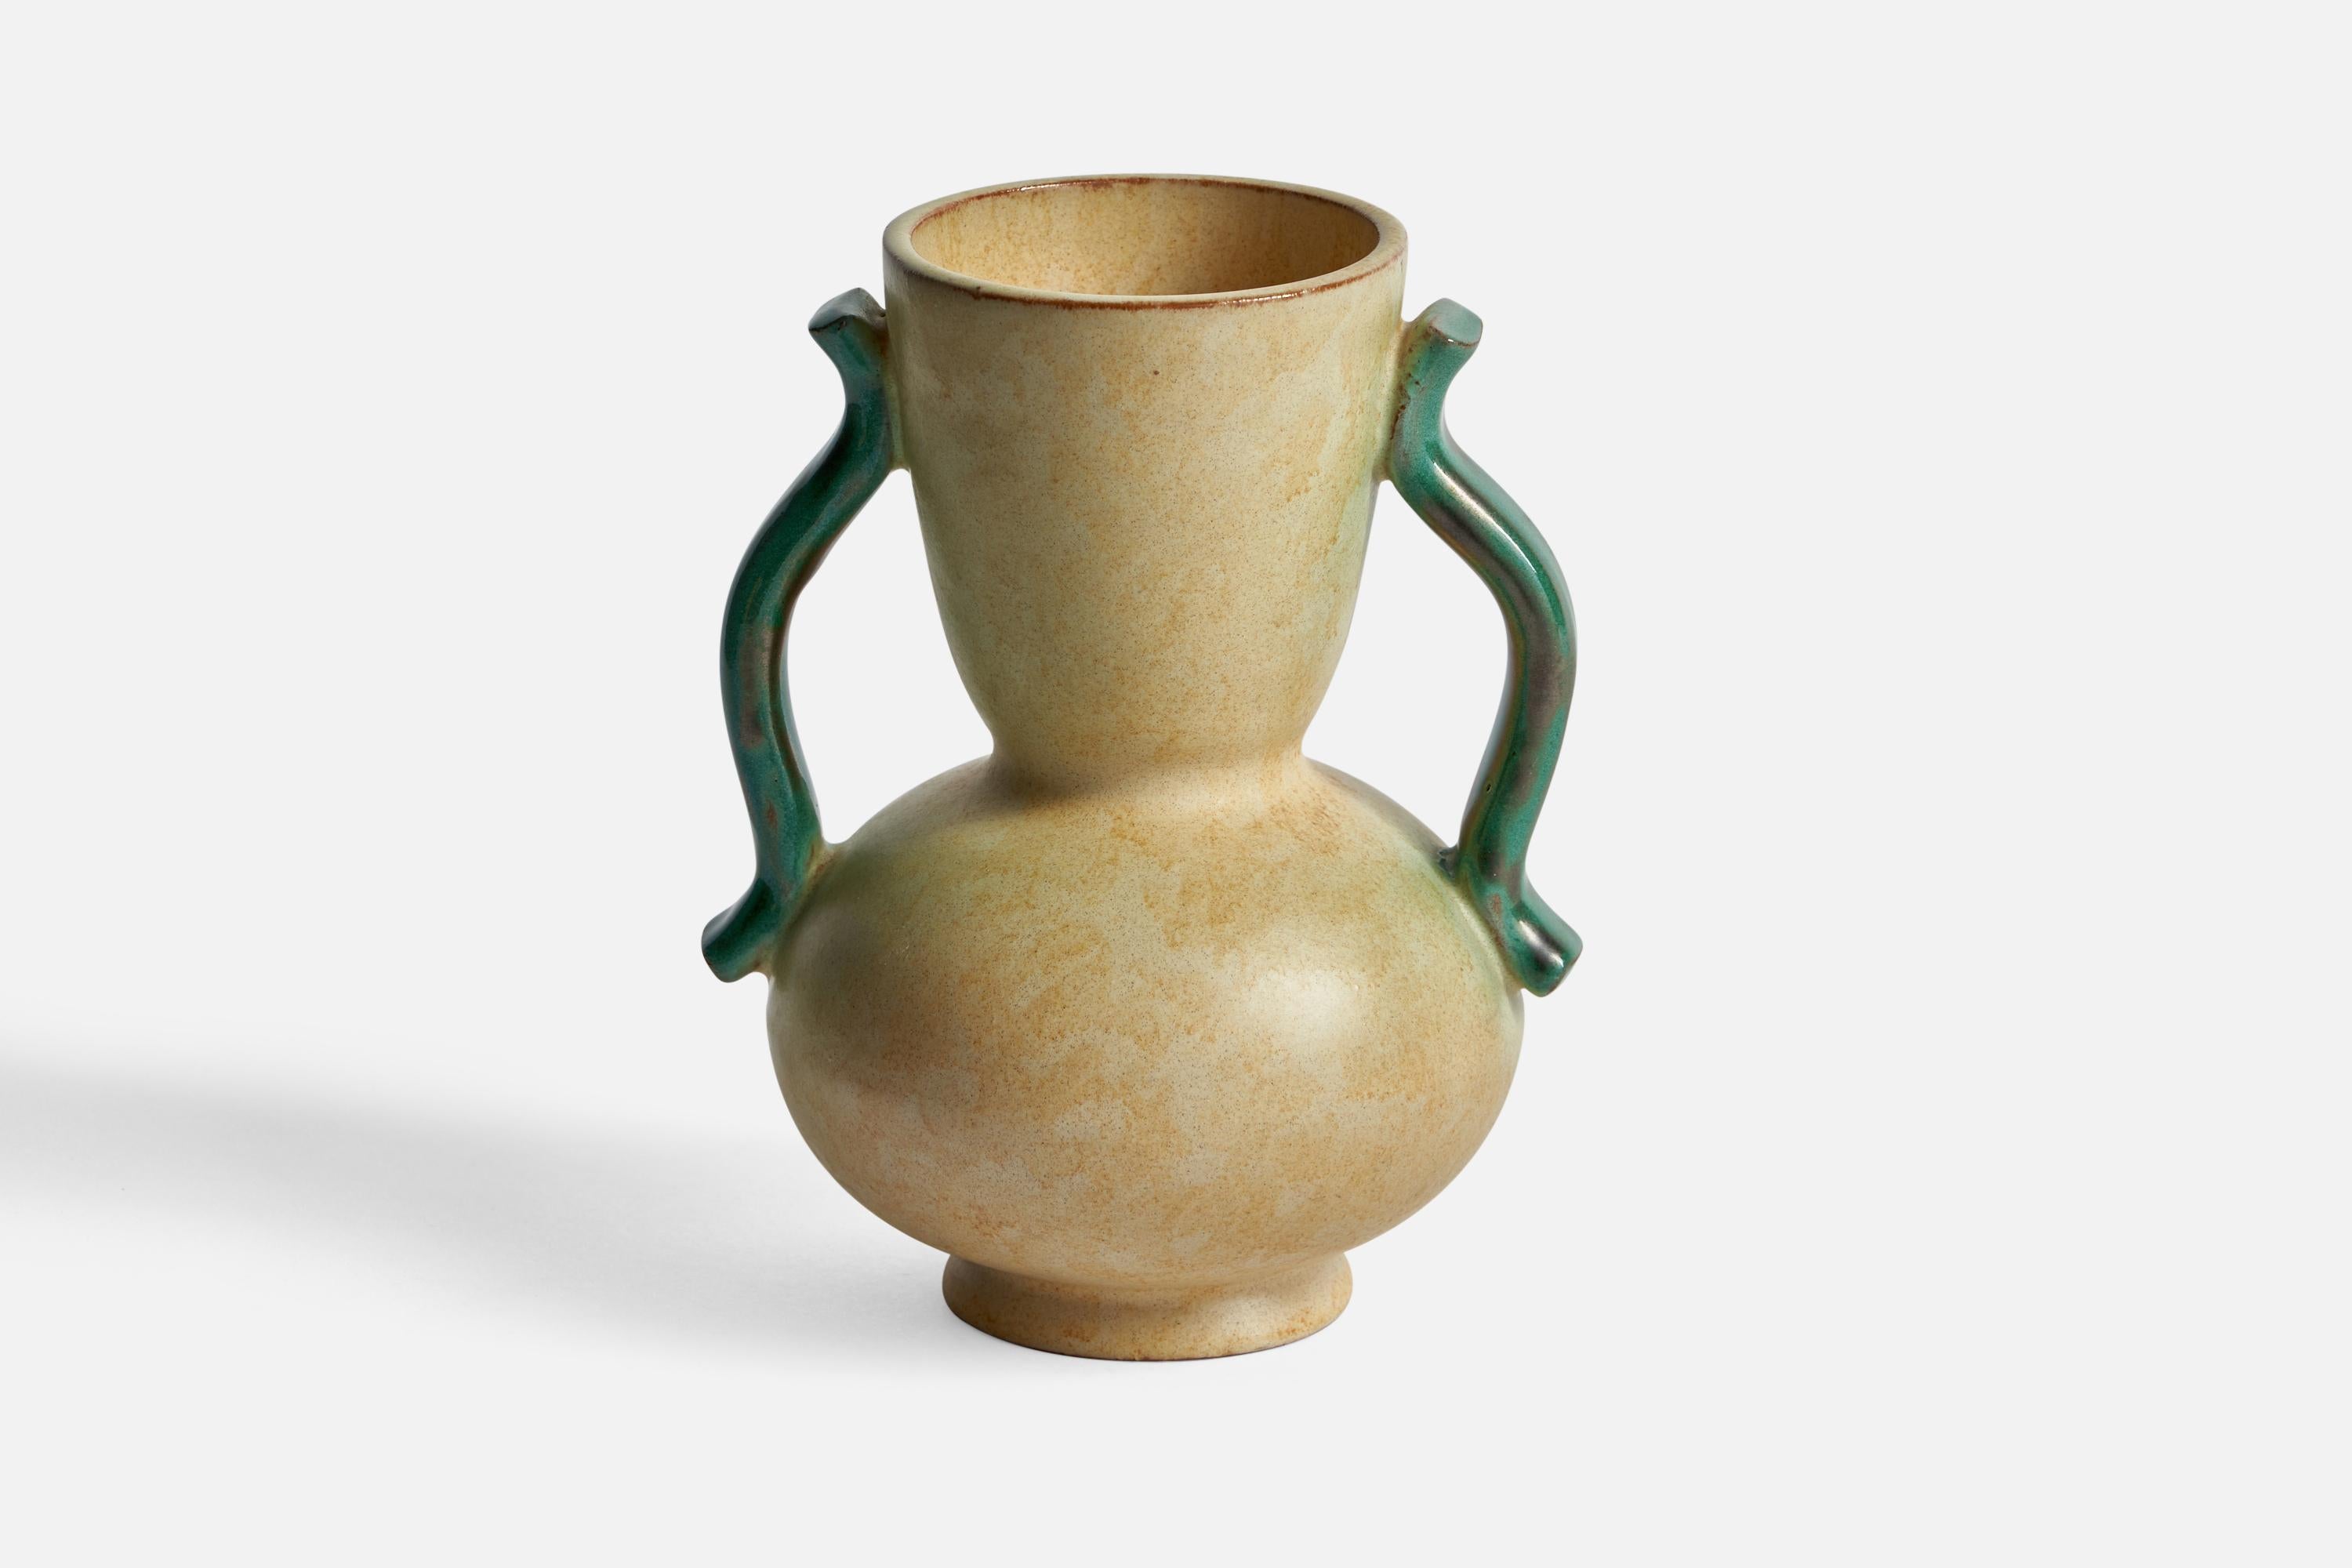 A beige and green-glazed earthenware vase designed by Anna-Lisa Thomson and produced by Upsala Ekeby, Sweden, 1930s.